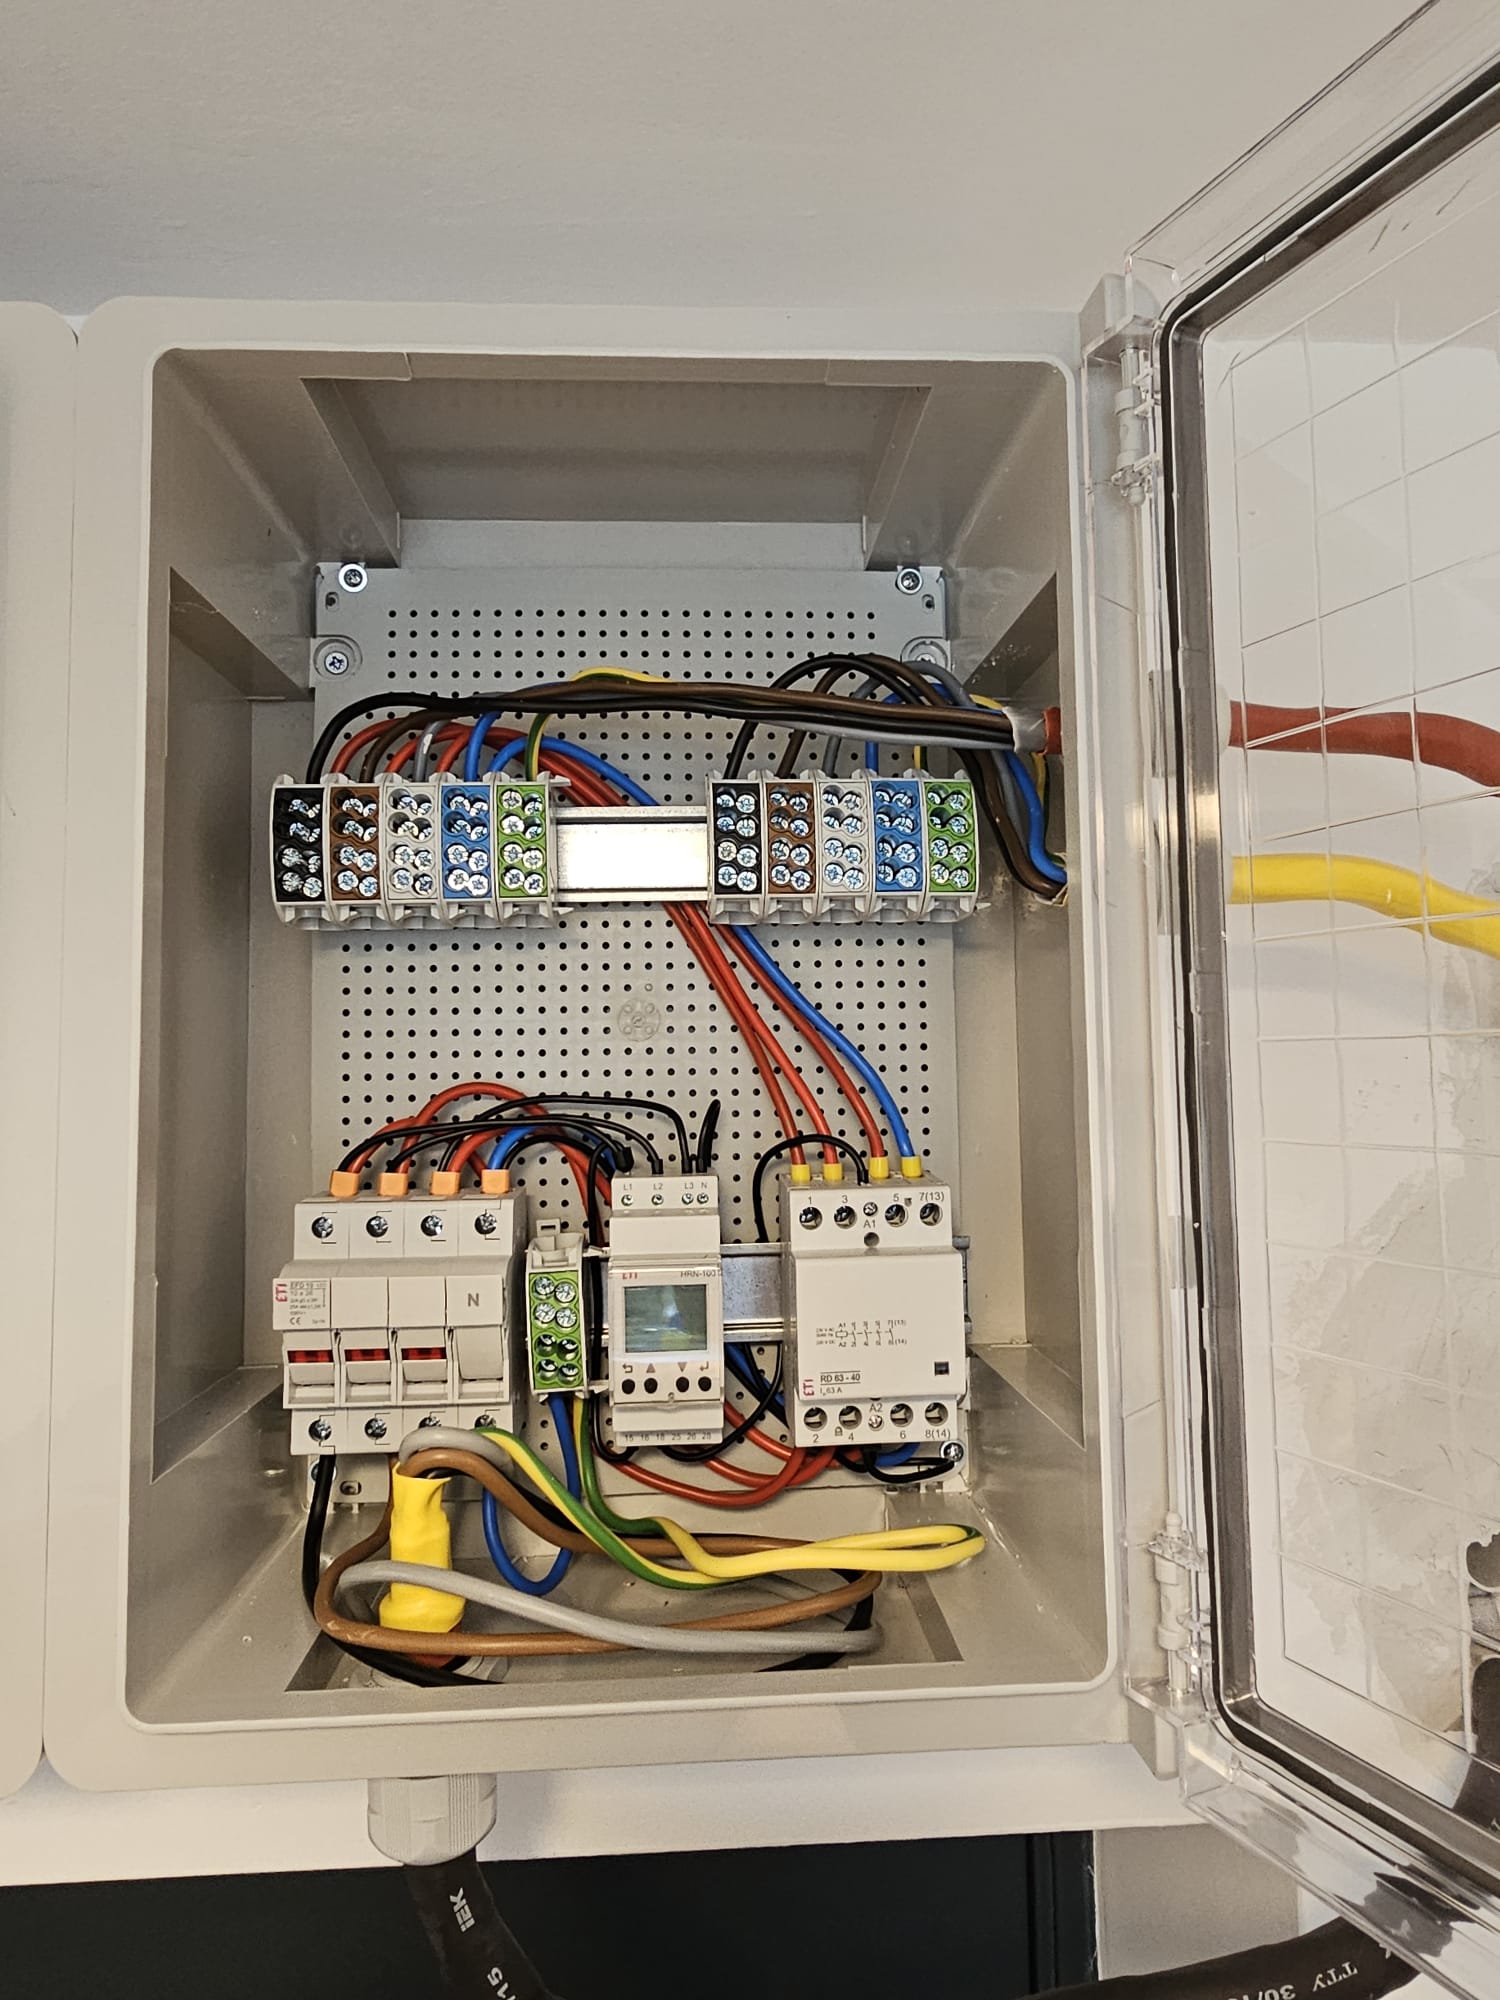 Main connection and first split to the PV inverter and the return for the fuseboard